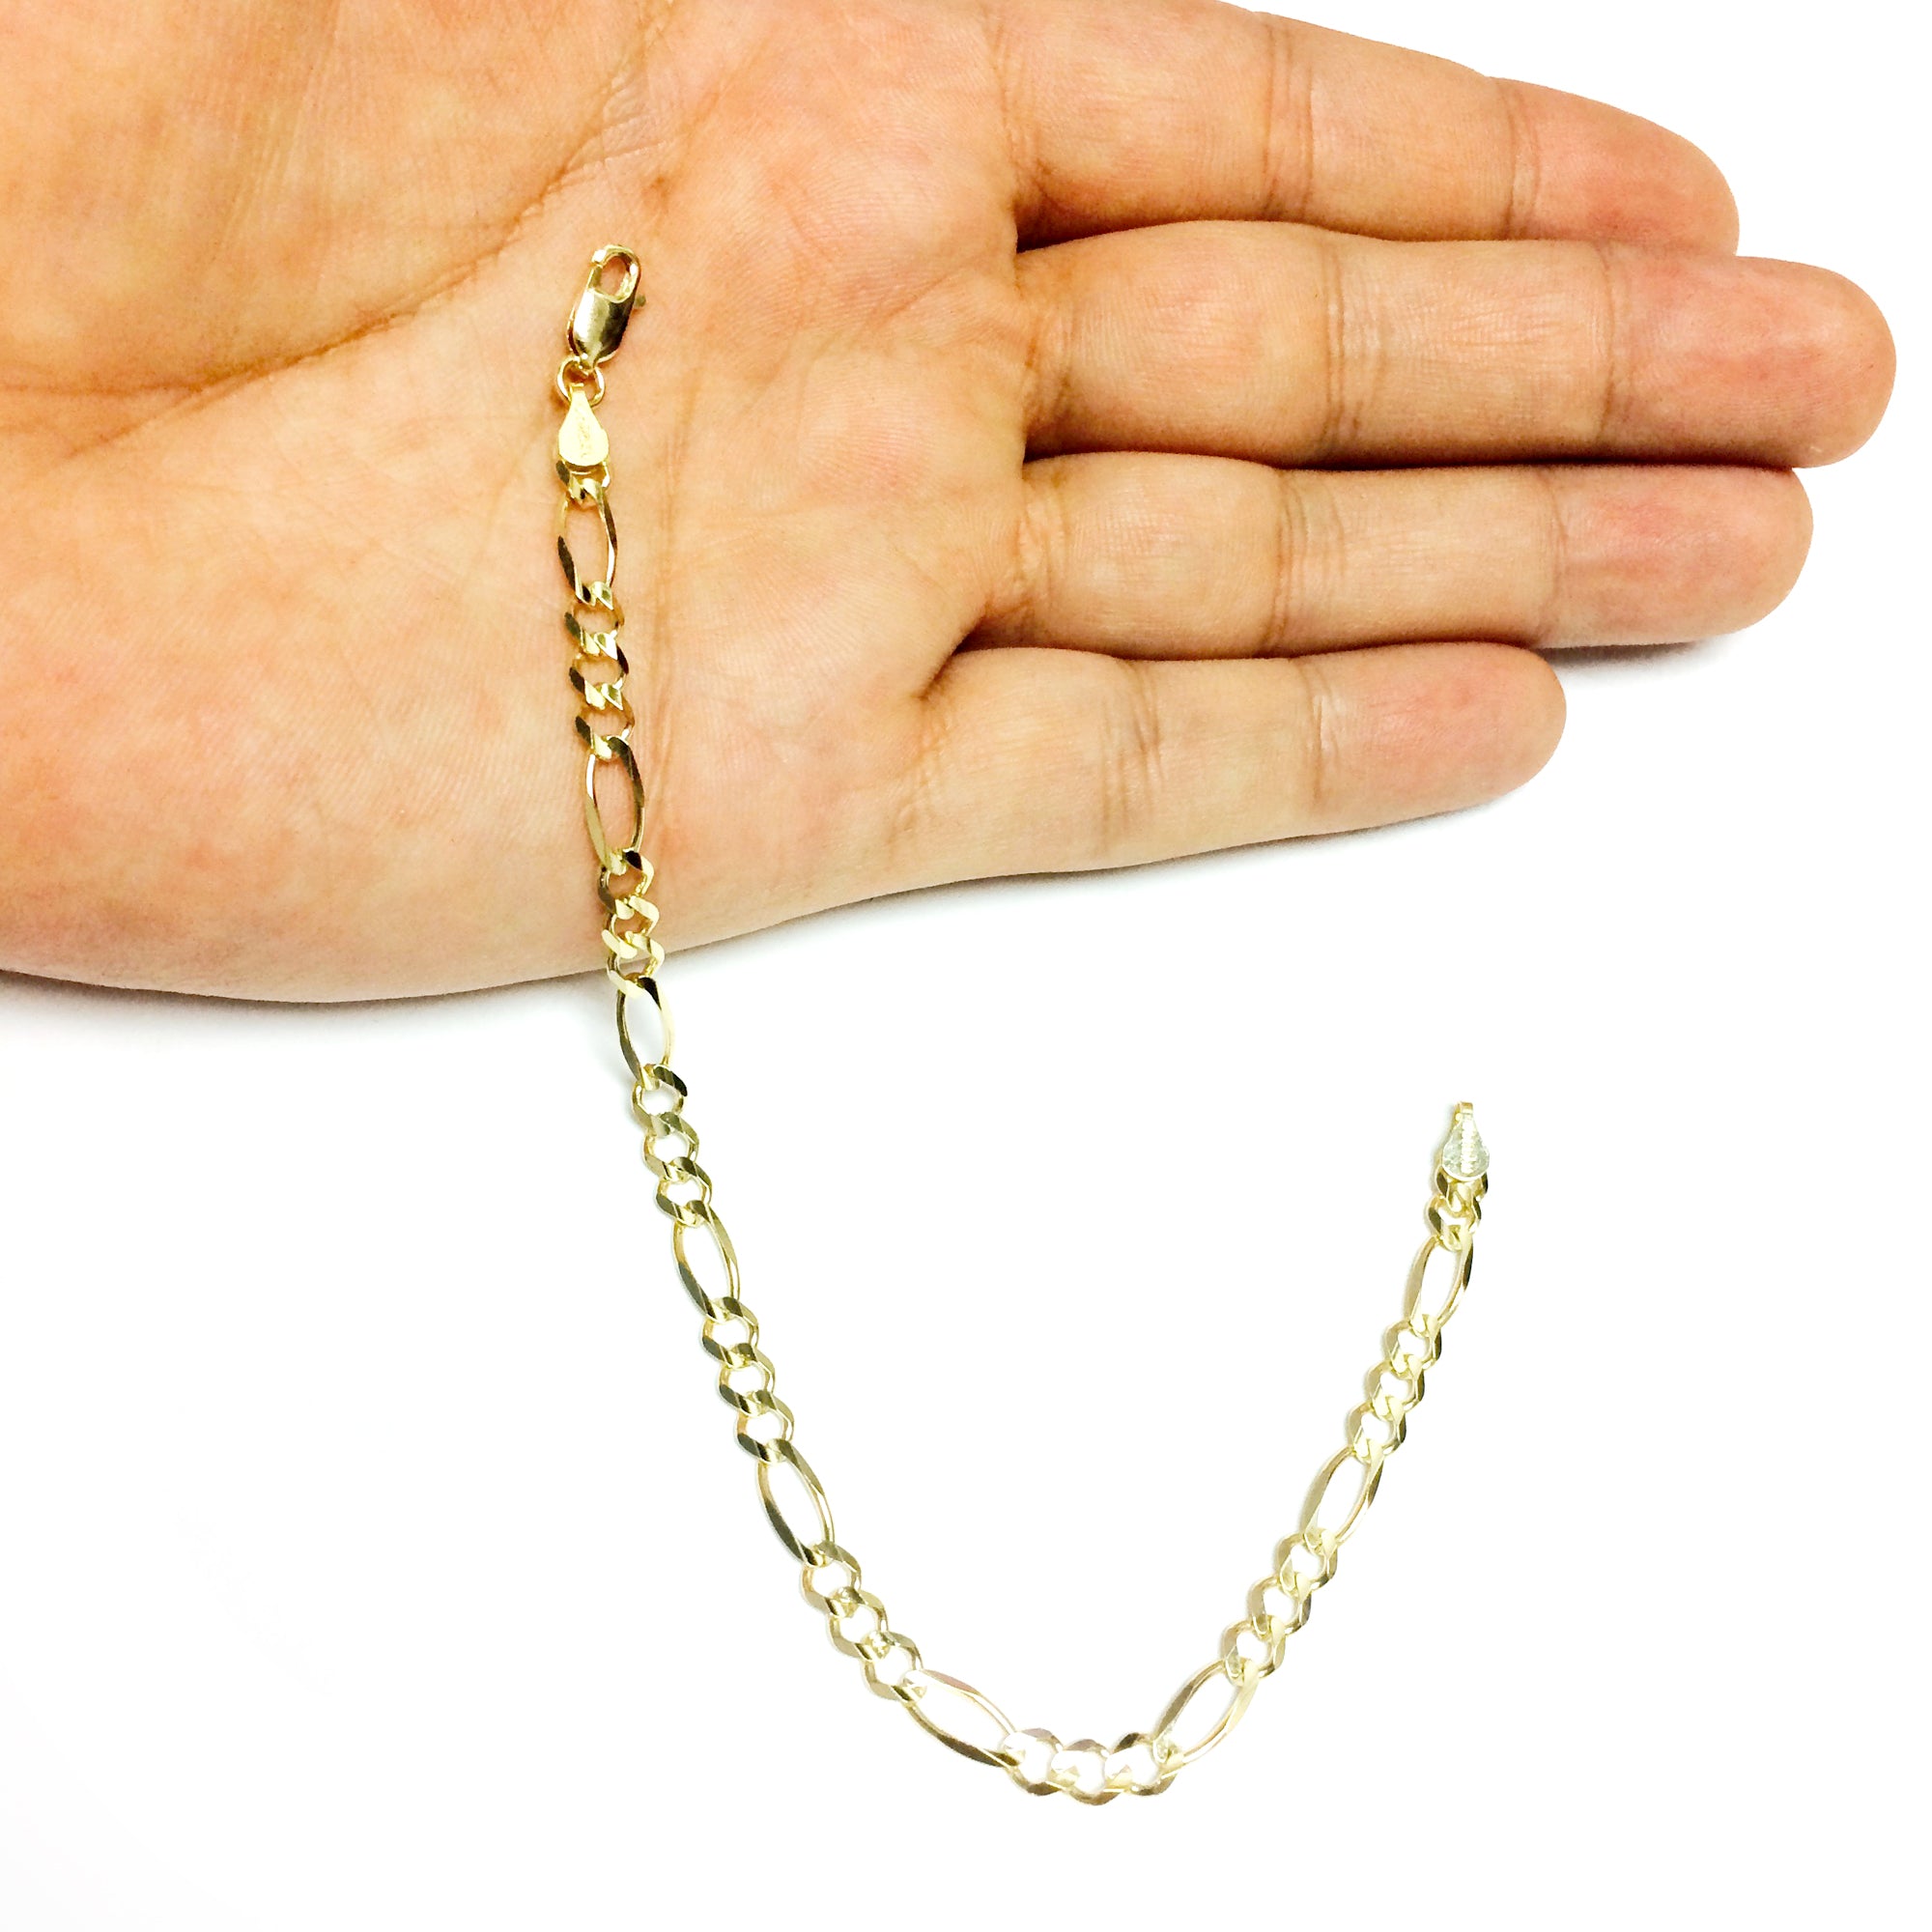 10k Yellow Gold Solid Figaro Chain Bracelet, 5.0mm